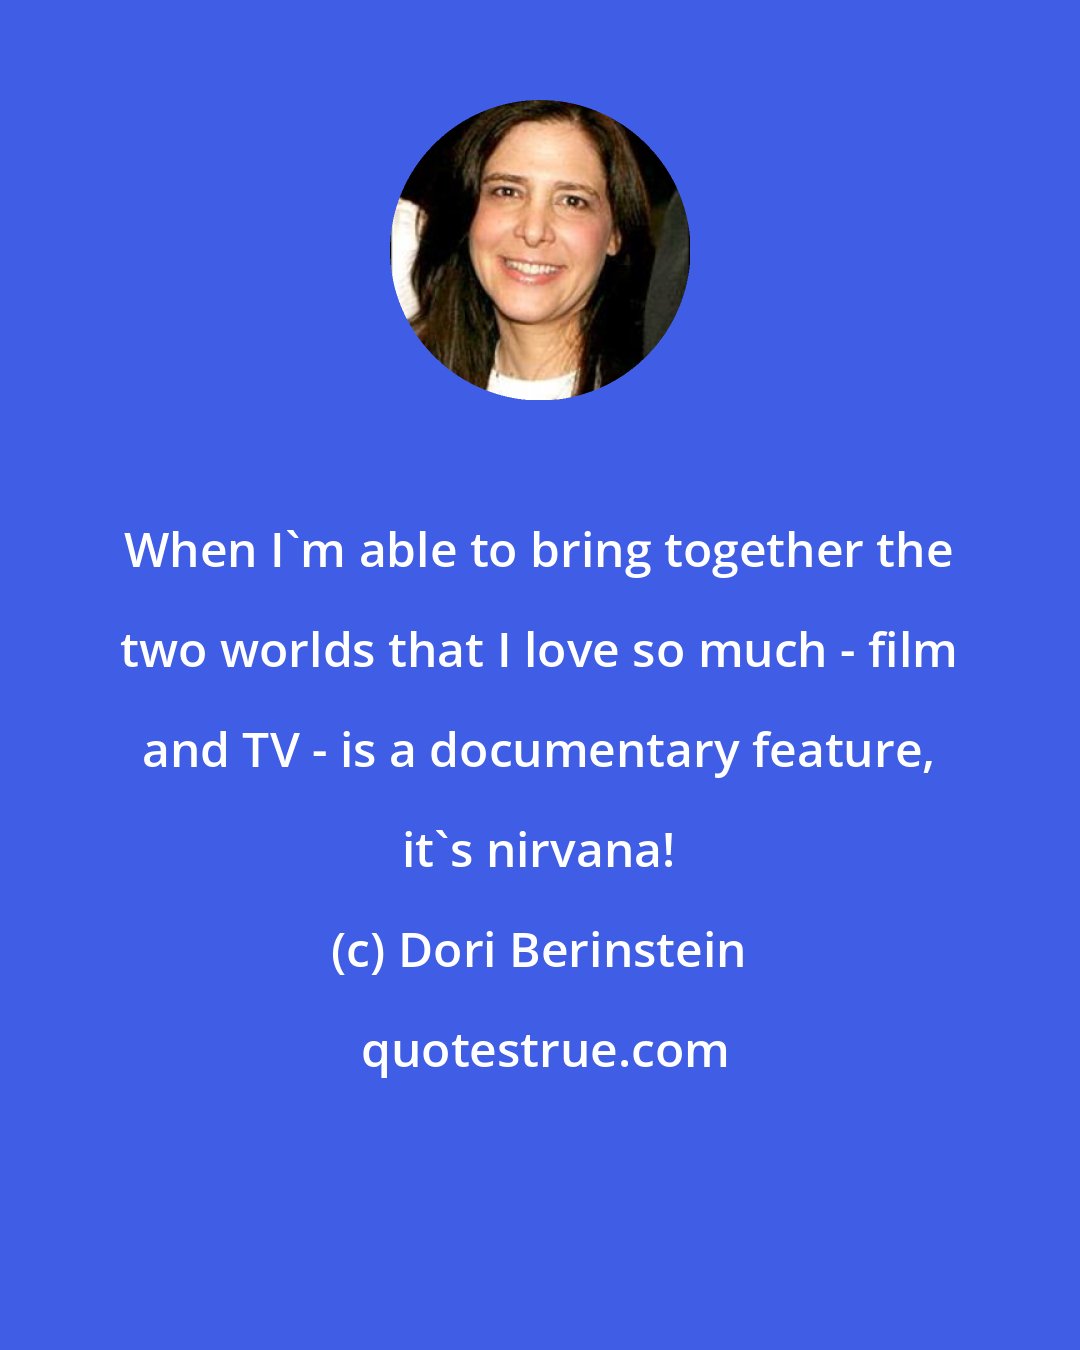 Dori Berinstein: When I'm able to bring together the two worlds that I love so much - film and TV - is a documentary feature, it's nirvana!